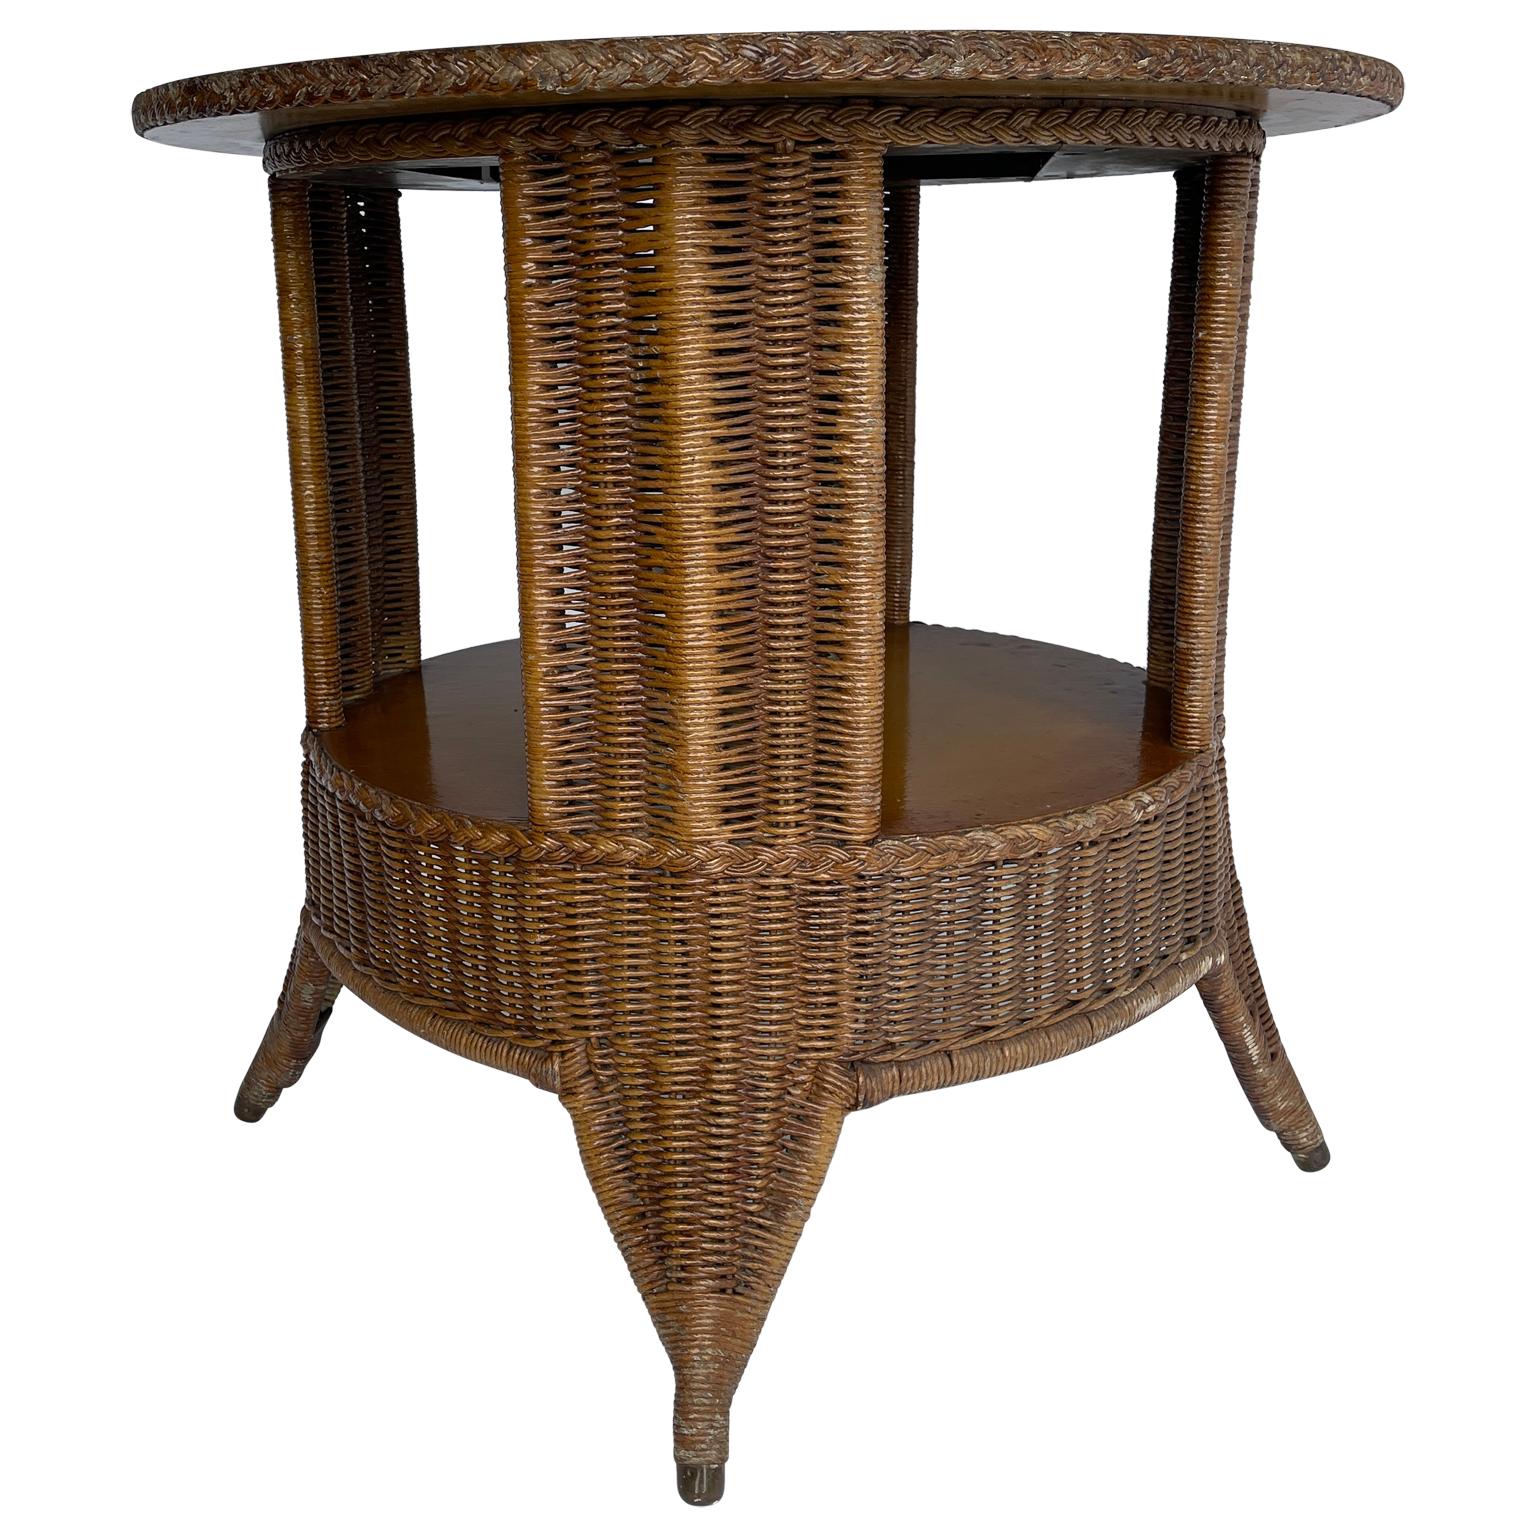 American Mid-Century Modern Wicker and Wood Round Side Table